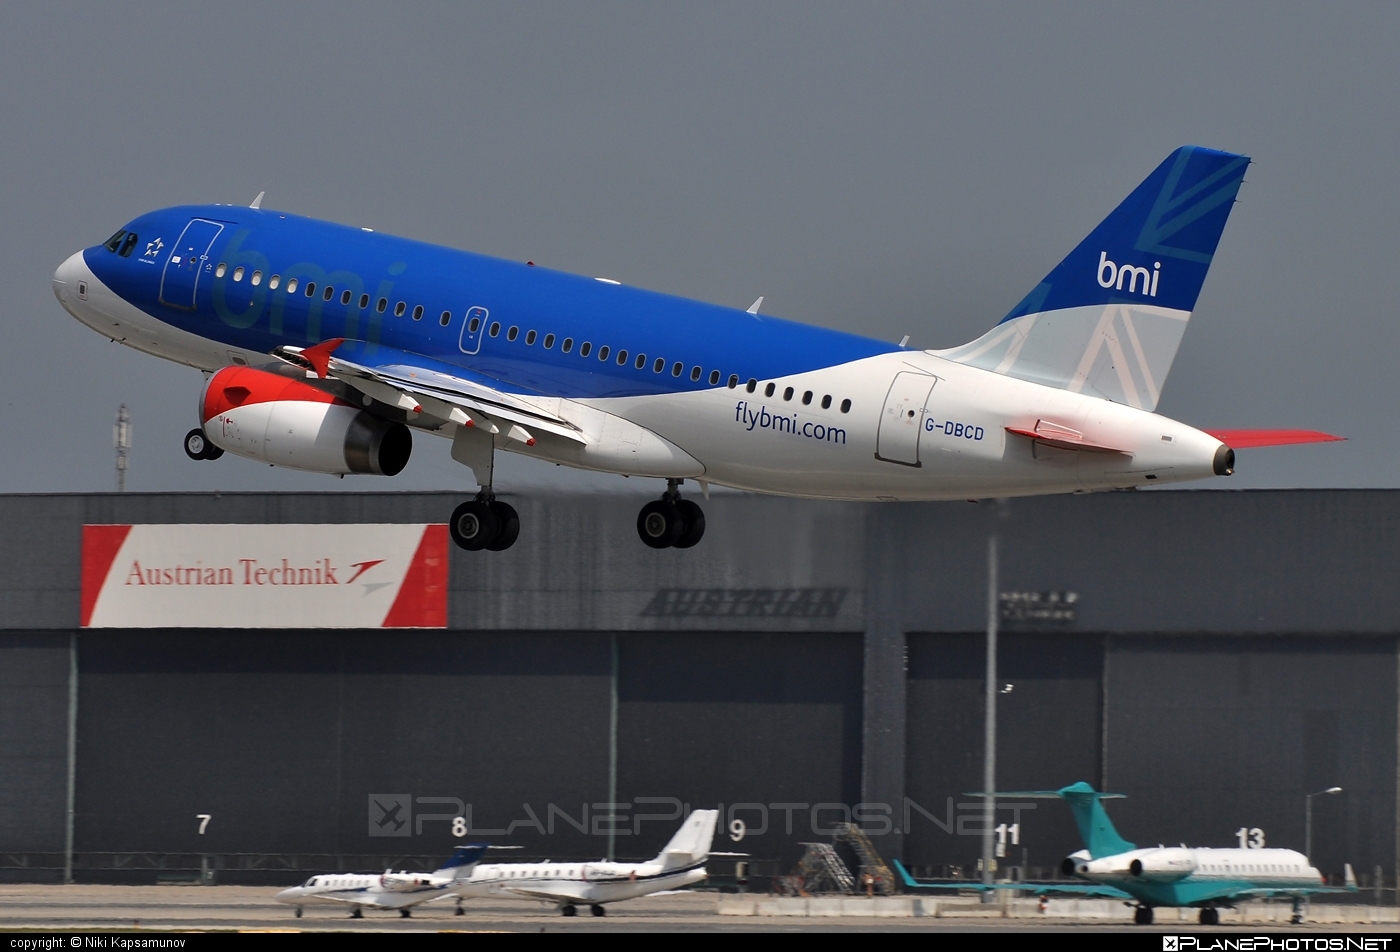 Airbus A319-131 - G-DBCD operated by bmi British Midland #a319 #a320family #airbus #airbus319